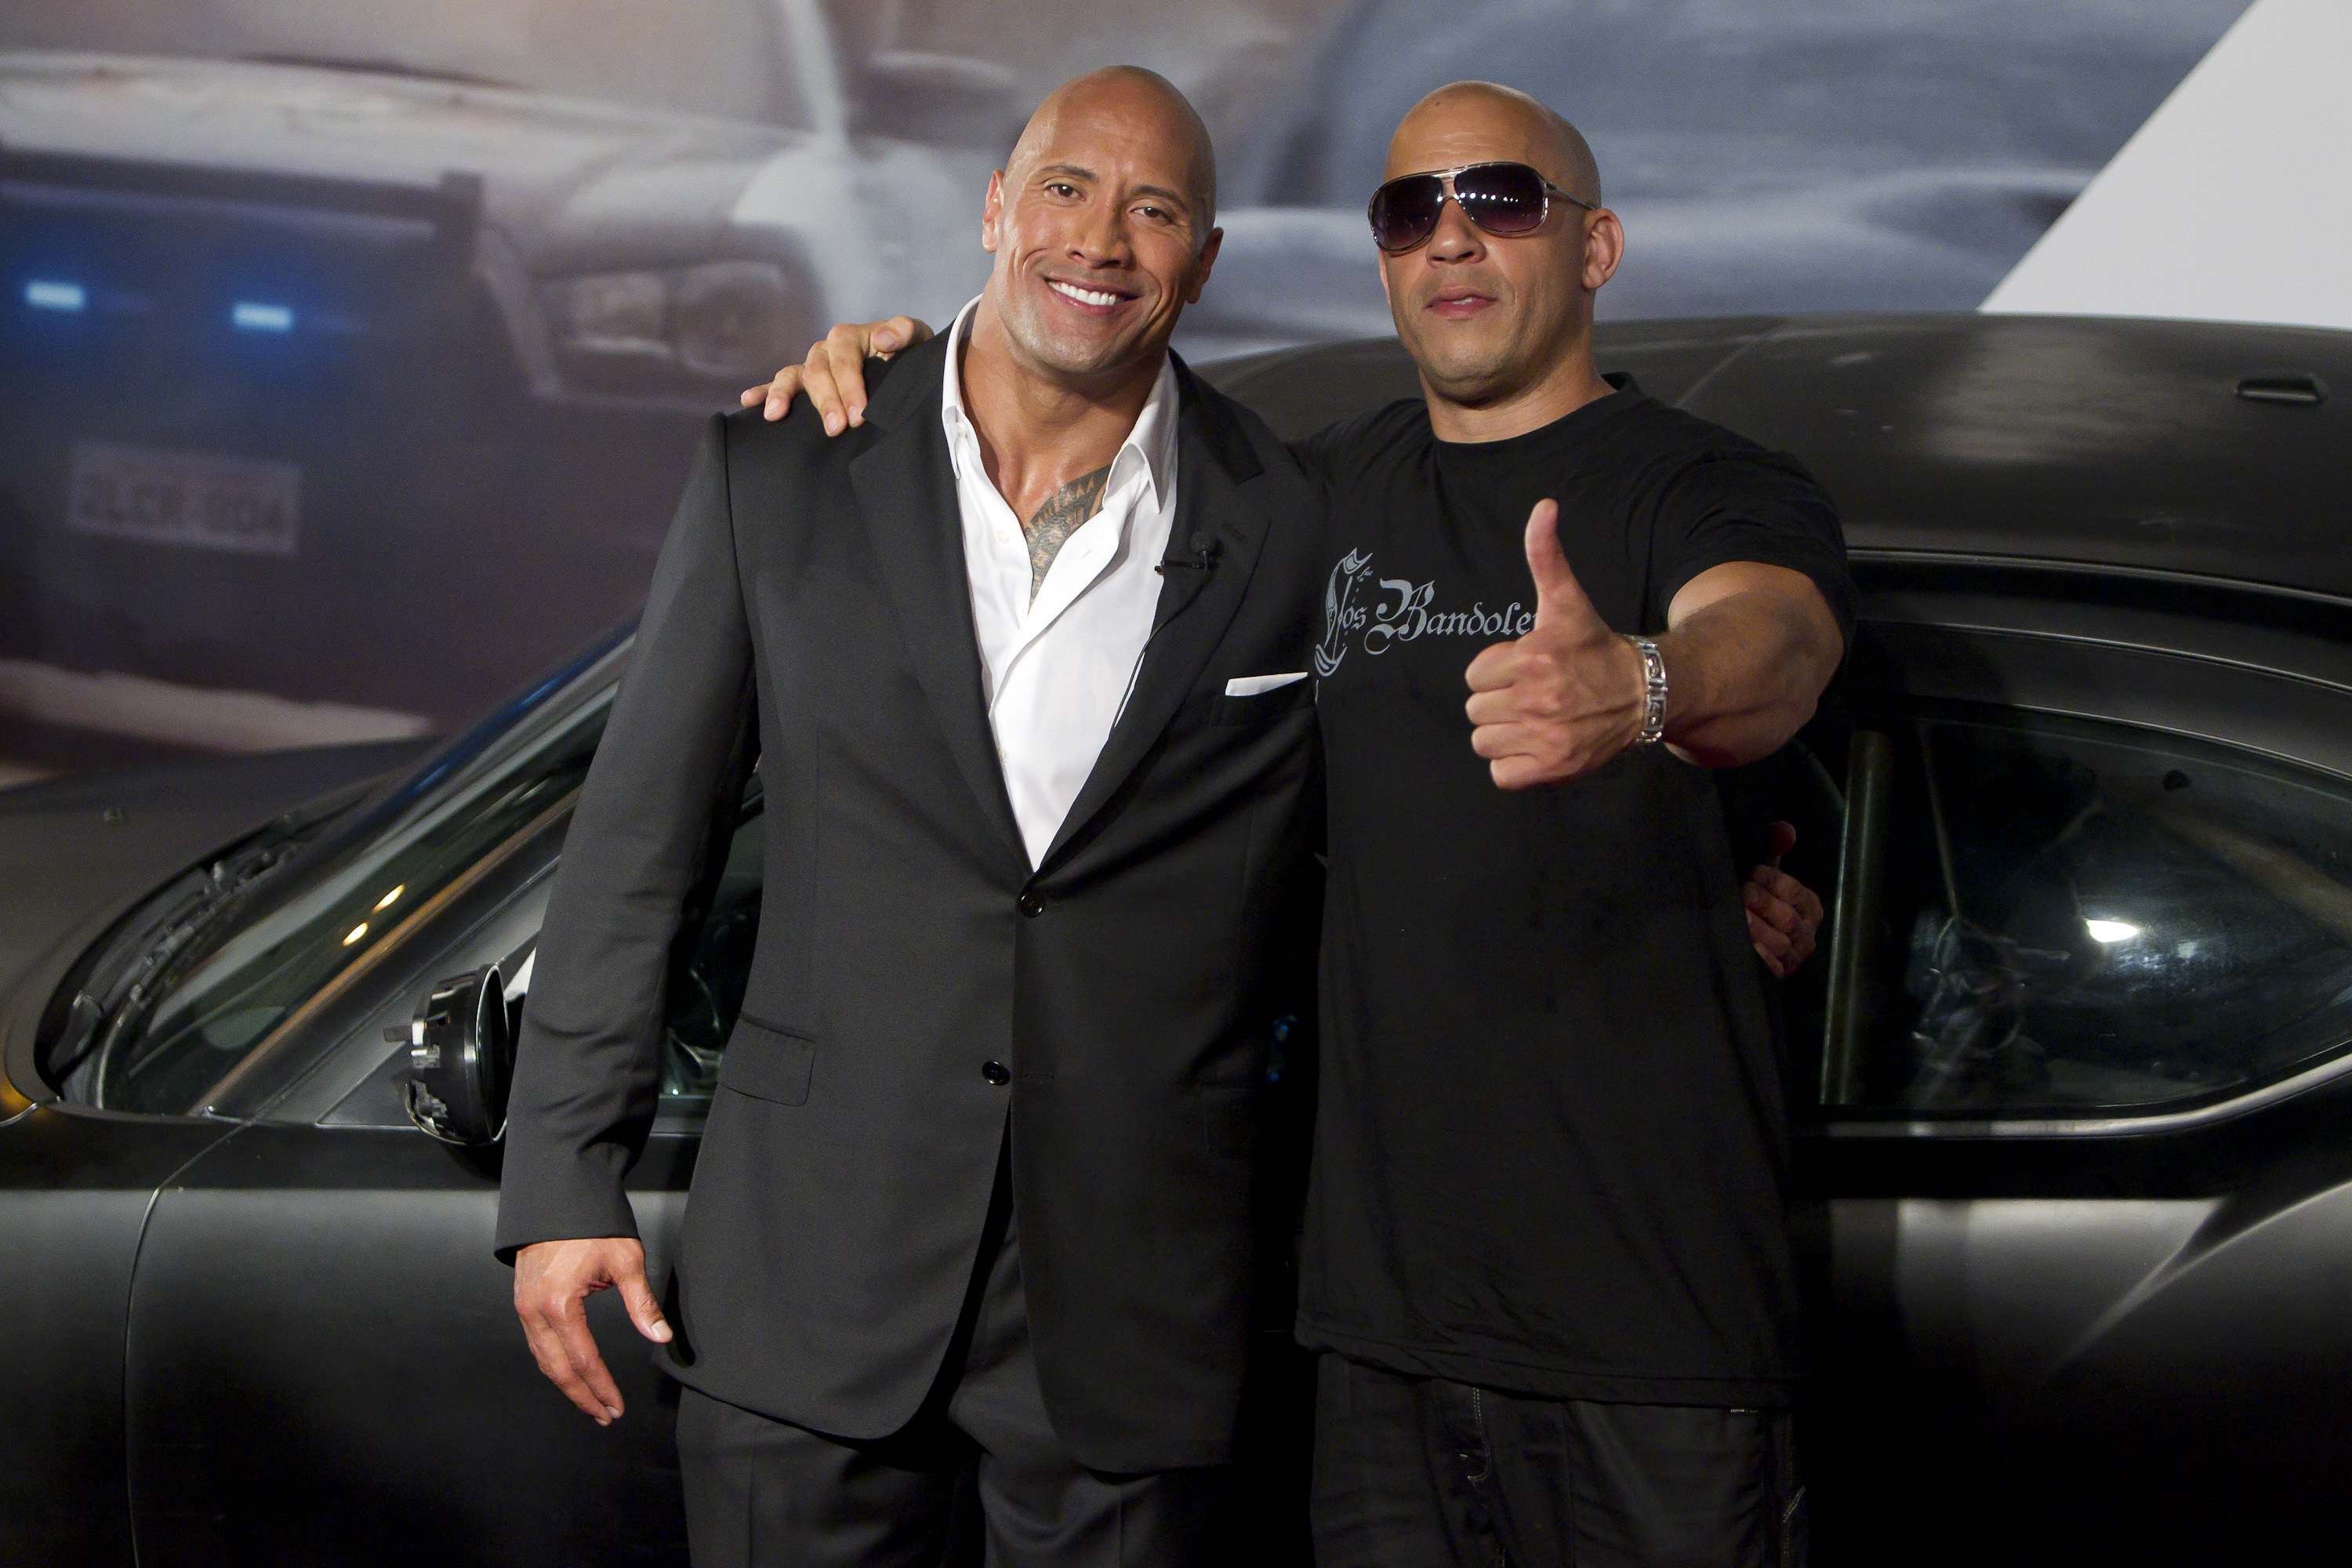 Dwayne Johnson (The Rock) and Vin Diesel (R) pose for photographers during the premiere of the movie "Fast and Furious 5" at Cinepolis Lagoon on April 15, 2011 in Rio de Janeiro, Brazil. (Buda Mendes/STF&mdash;Getty Images)